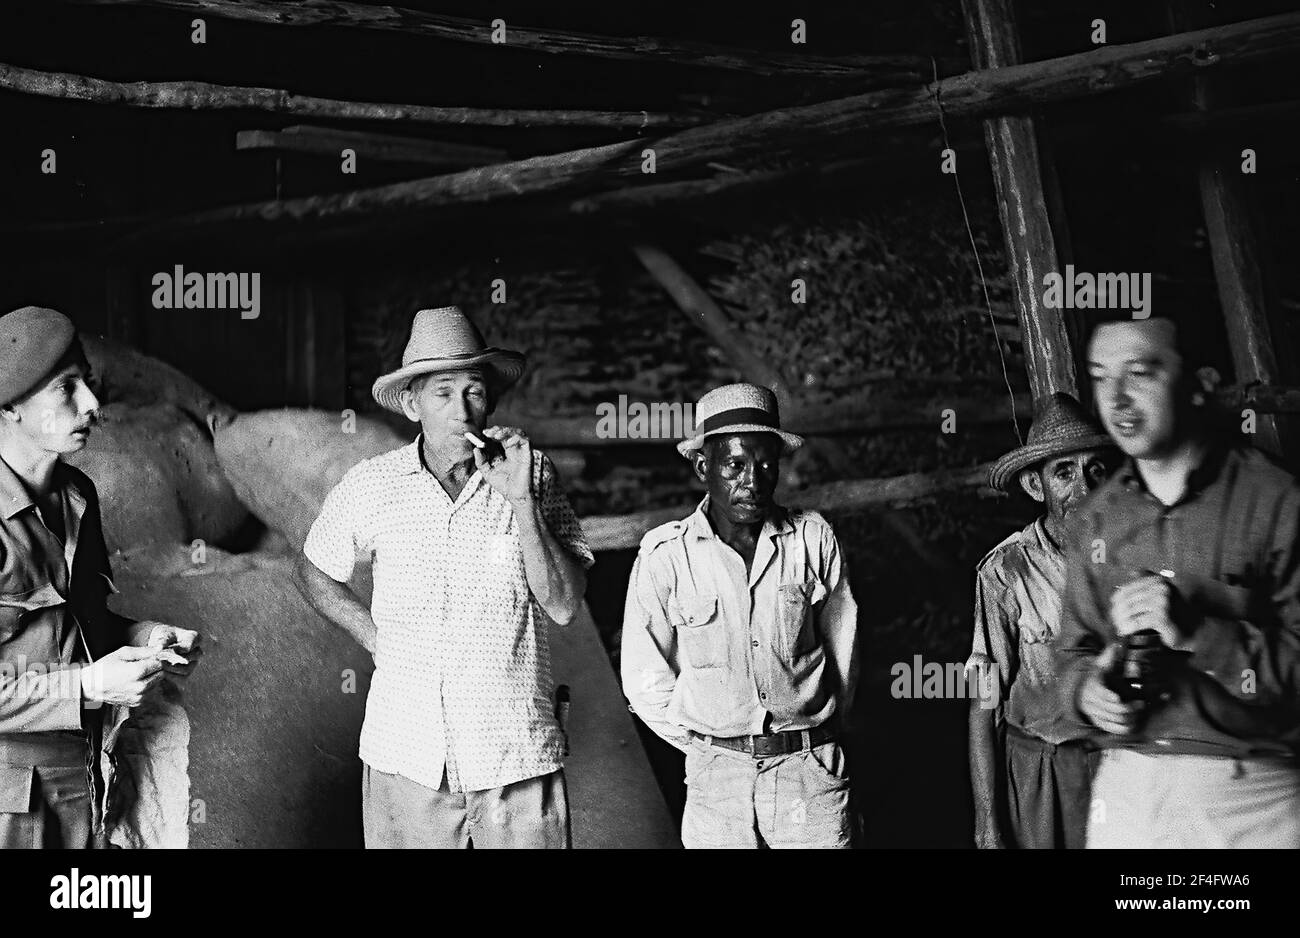 Tobacco workers at PR2 cooperative, Pinar del Rio, Cuba, 1964. From the Deena Stryker photographs collection. () Stock Photo